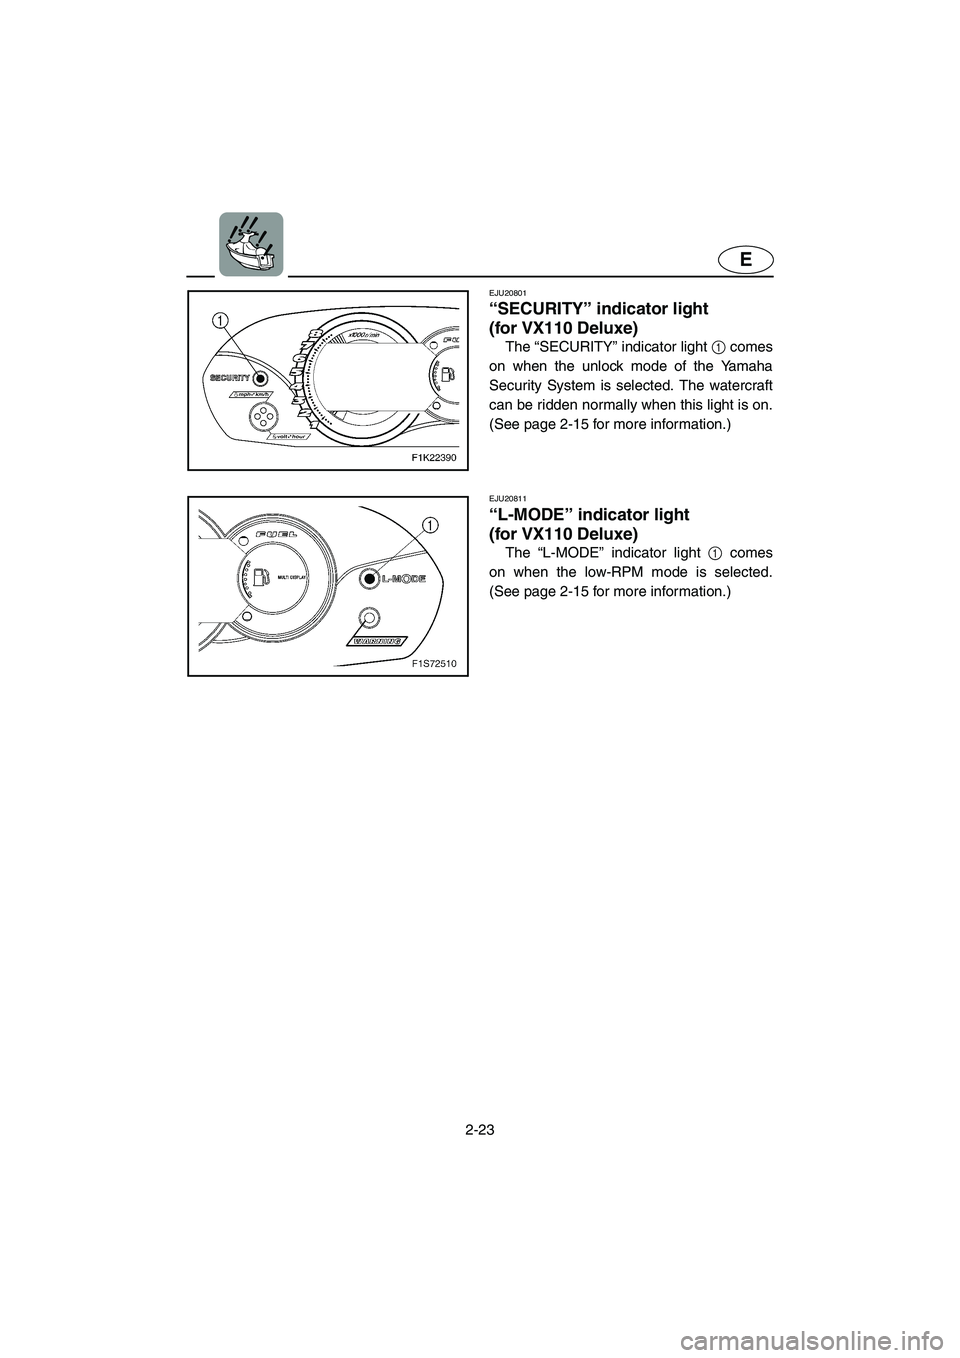 YAMAHA VX CRUISER 2005  Owners Manual 2-23
E
EJU20801 
“SECURITY” indicator light 
(for VX110 Deluxe) 
The “SECURITY” indicator light 1 comes
on when the unlock mode of the Yamaha
Security System is selected. The watercraft
can be